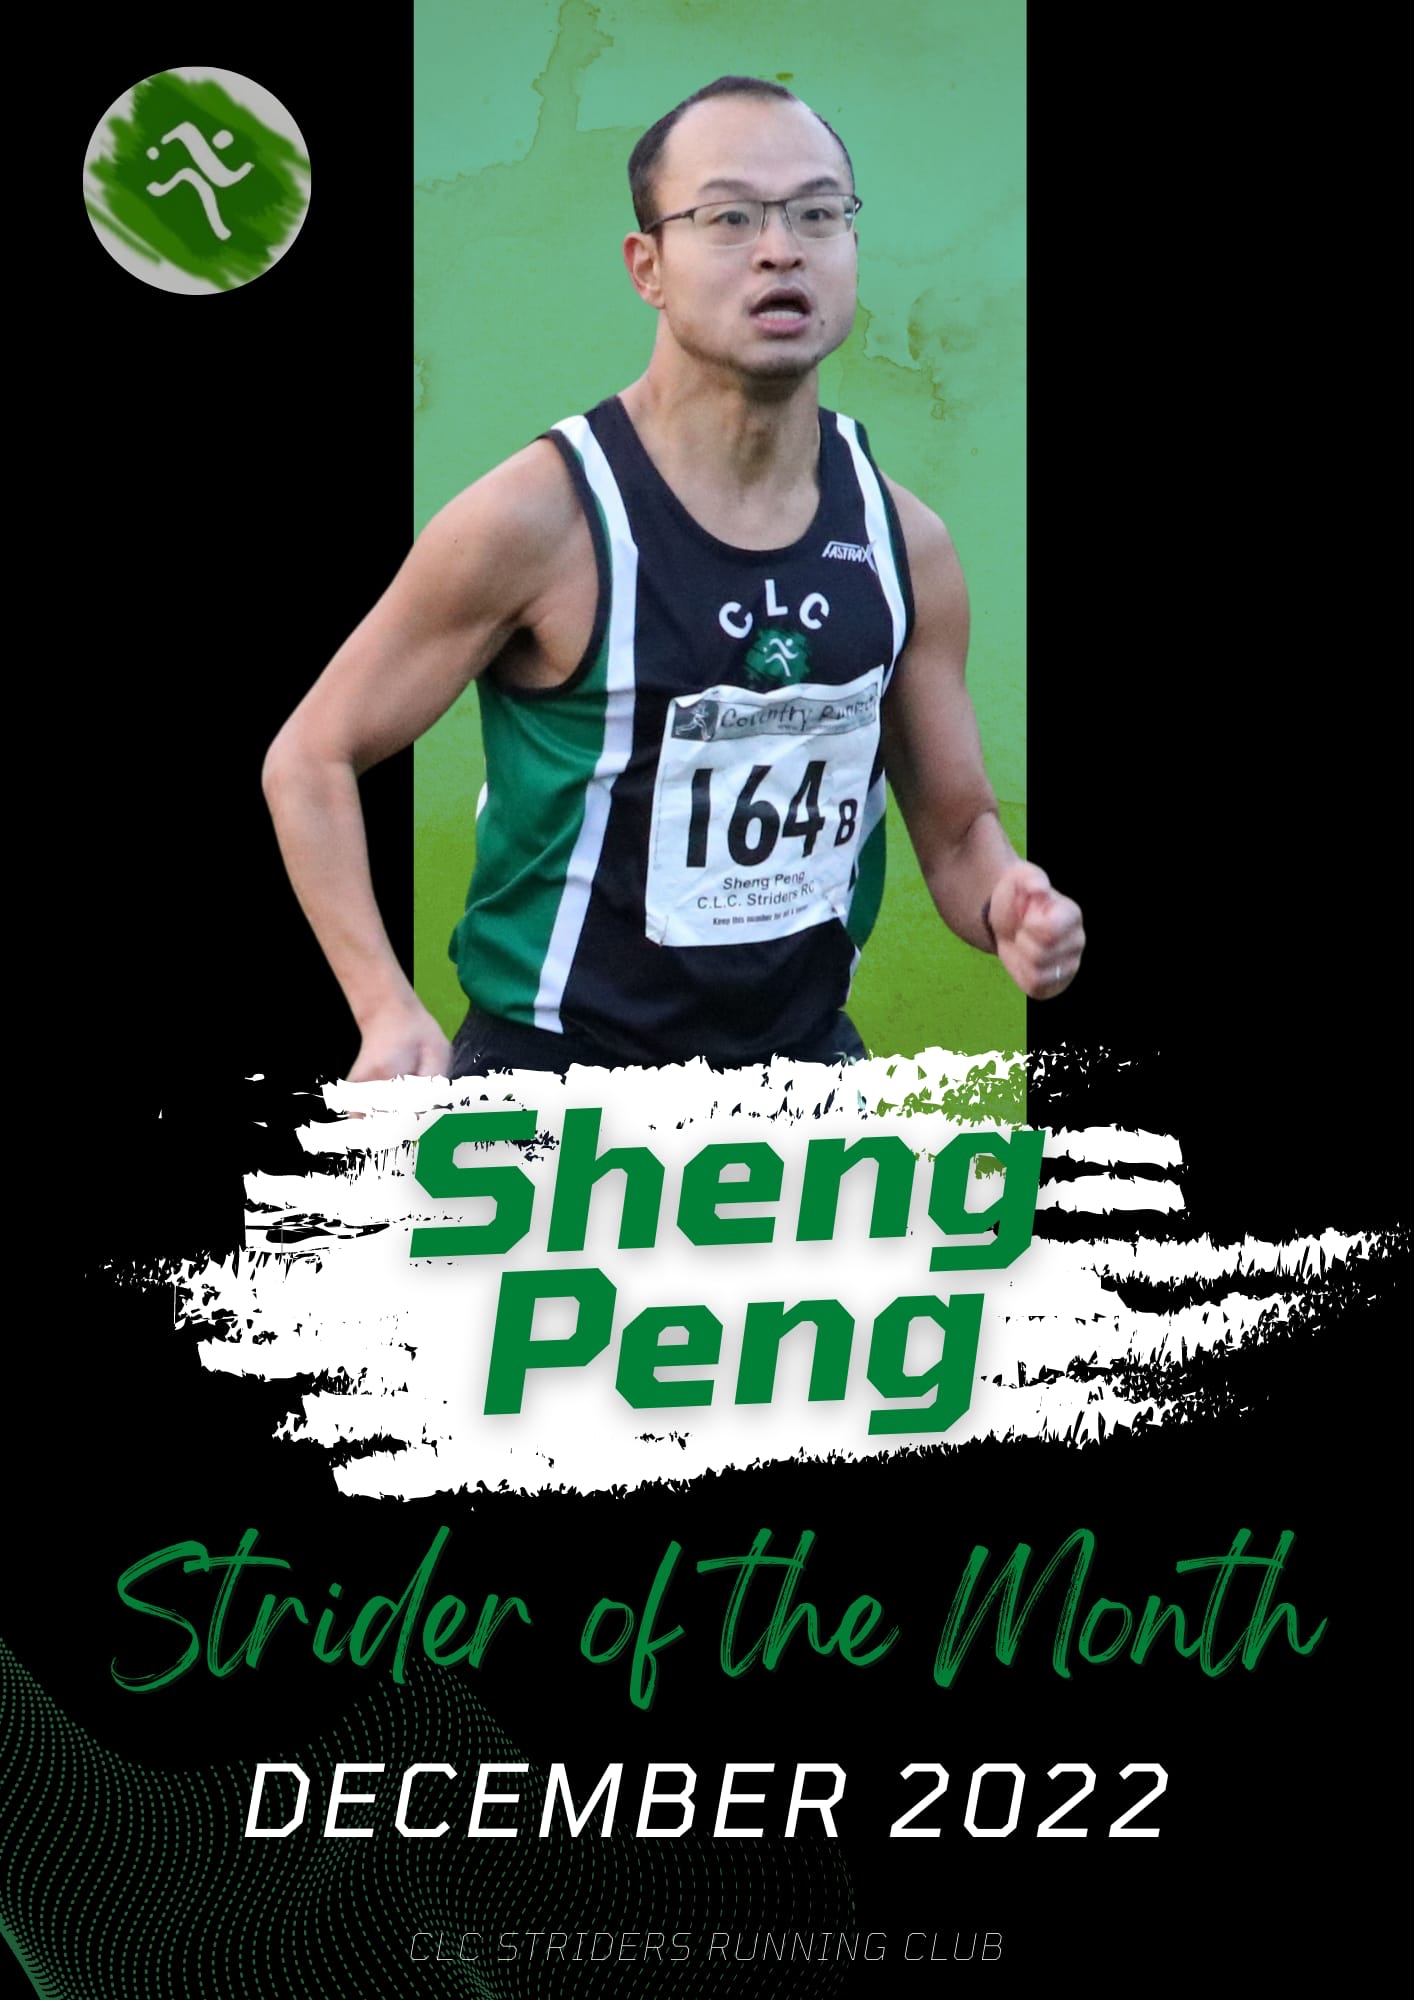 Strider of the month Sheng Peng